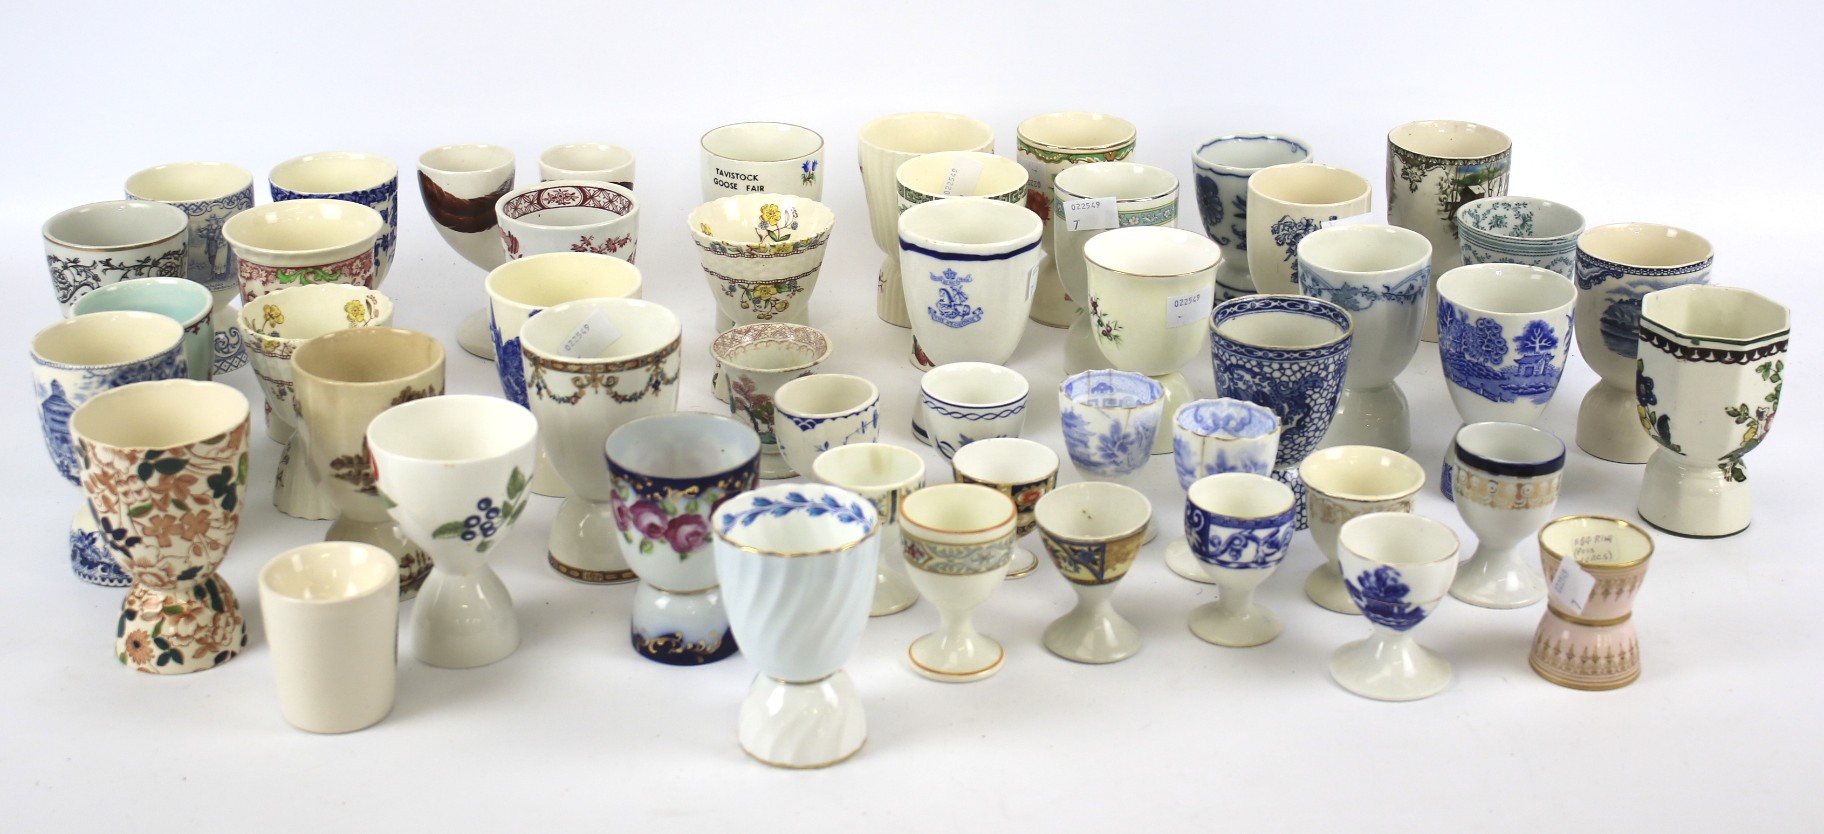 A collection of English and Continental pottery and porcelain egg cups.